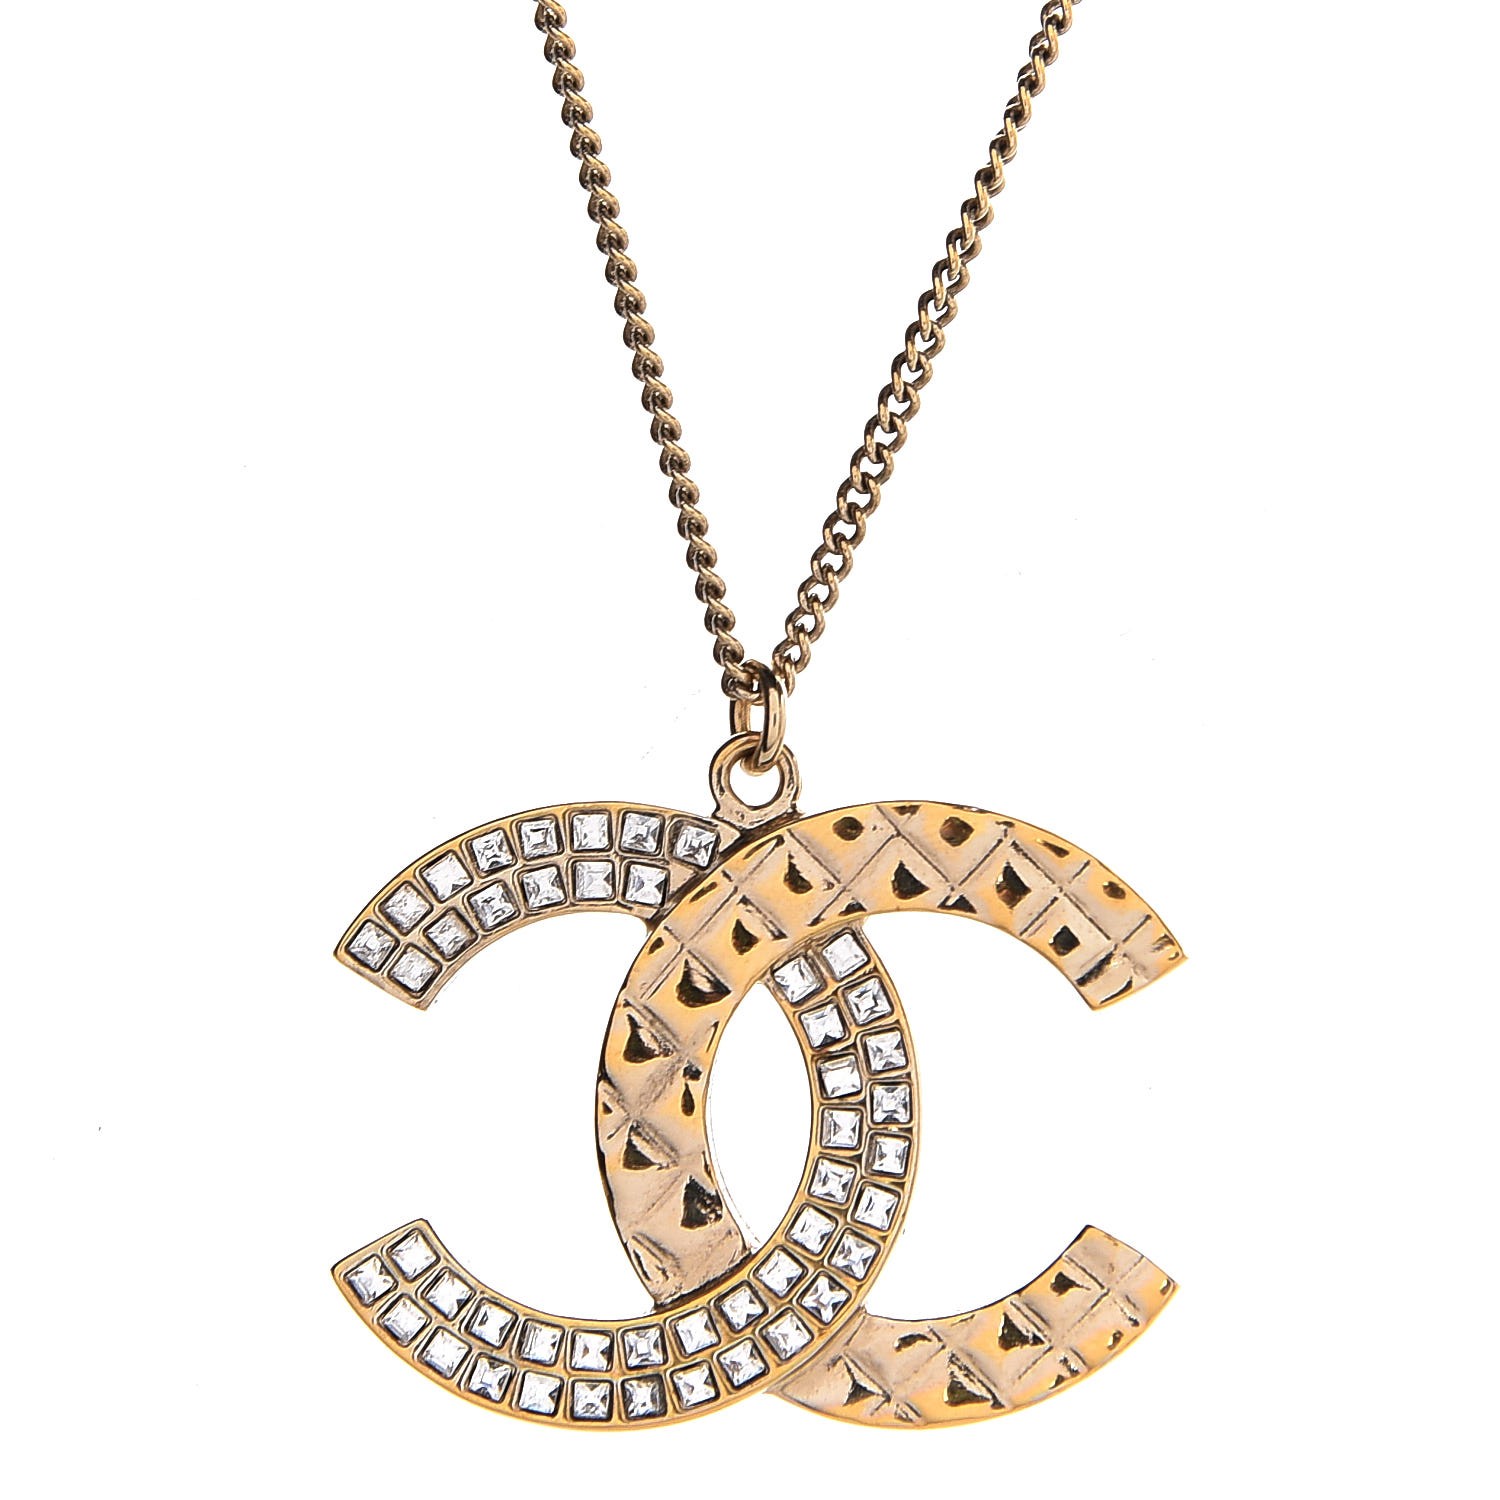 CHANEL Baguette Crystal Quilted CC Pendant Necklace Gold 303132